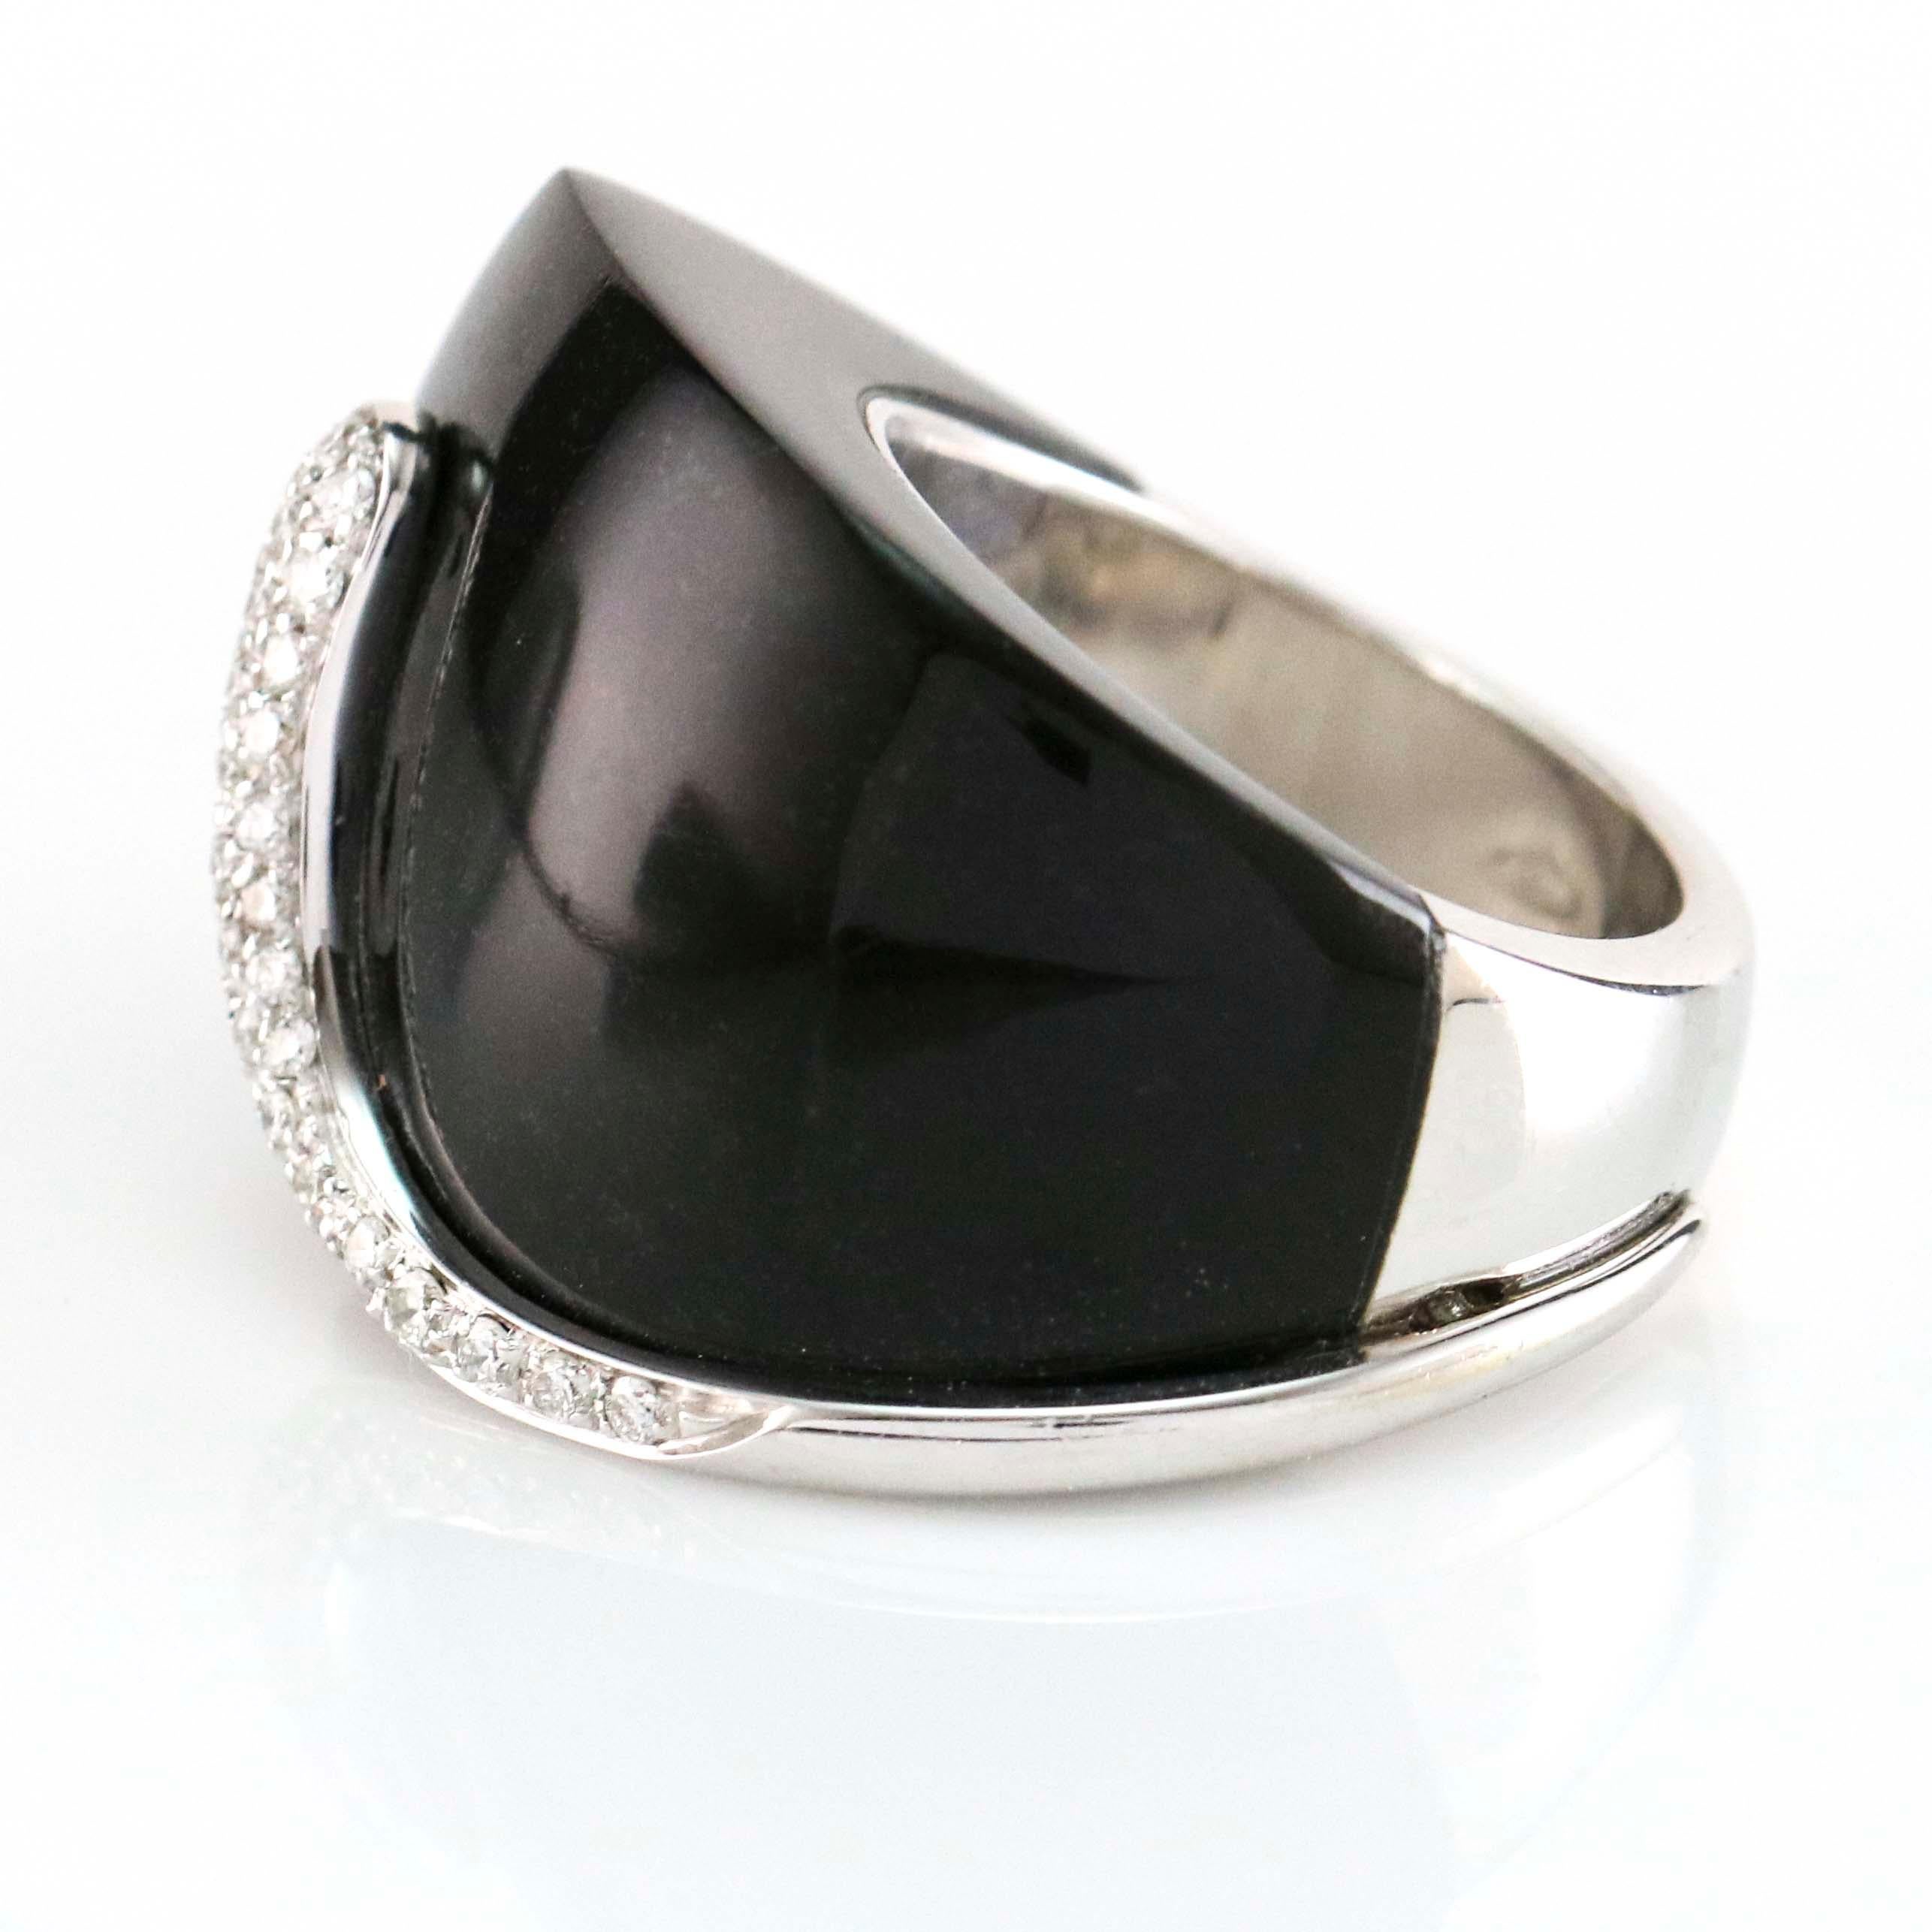 K Di Kuore Ebony 18 Karat White Gold Diamond Cocktail Ring In Good Condition For Sale In Fort Lauderdale, FL